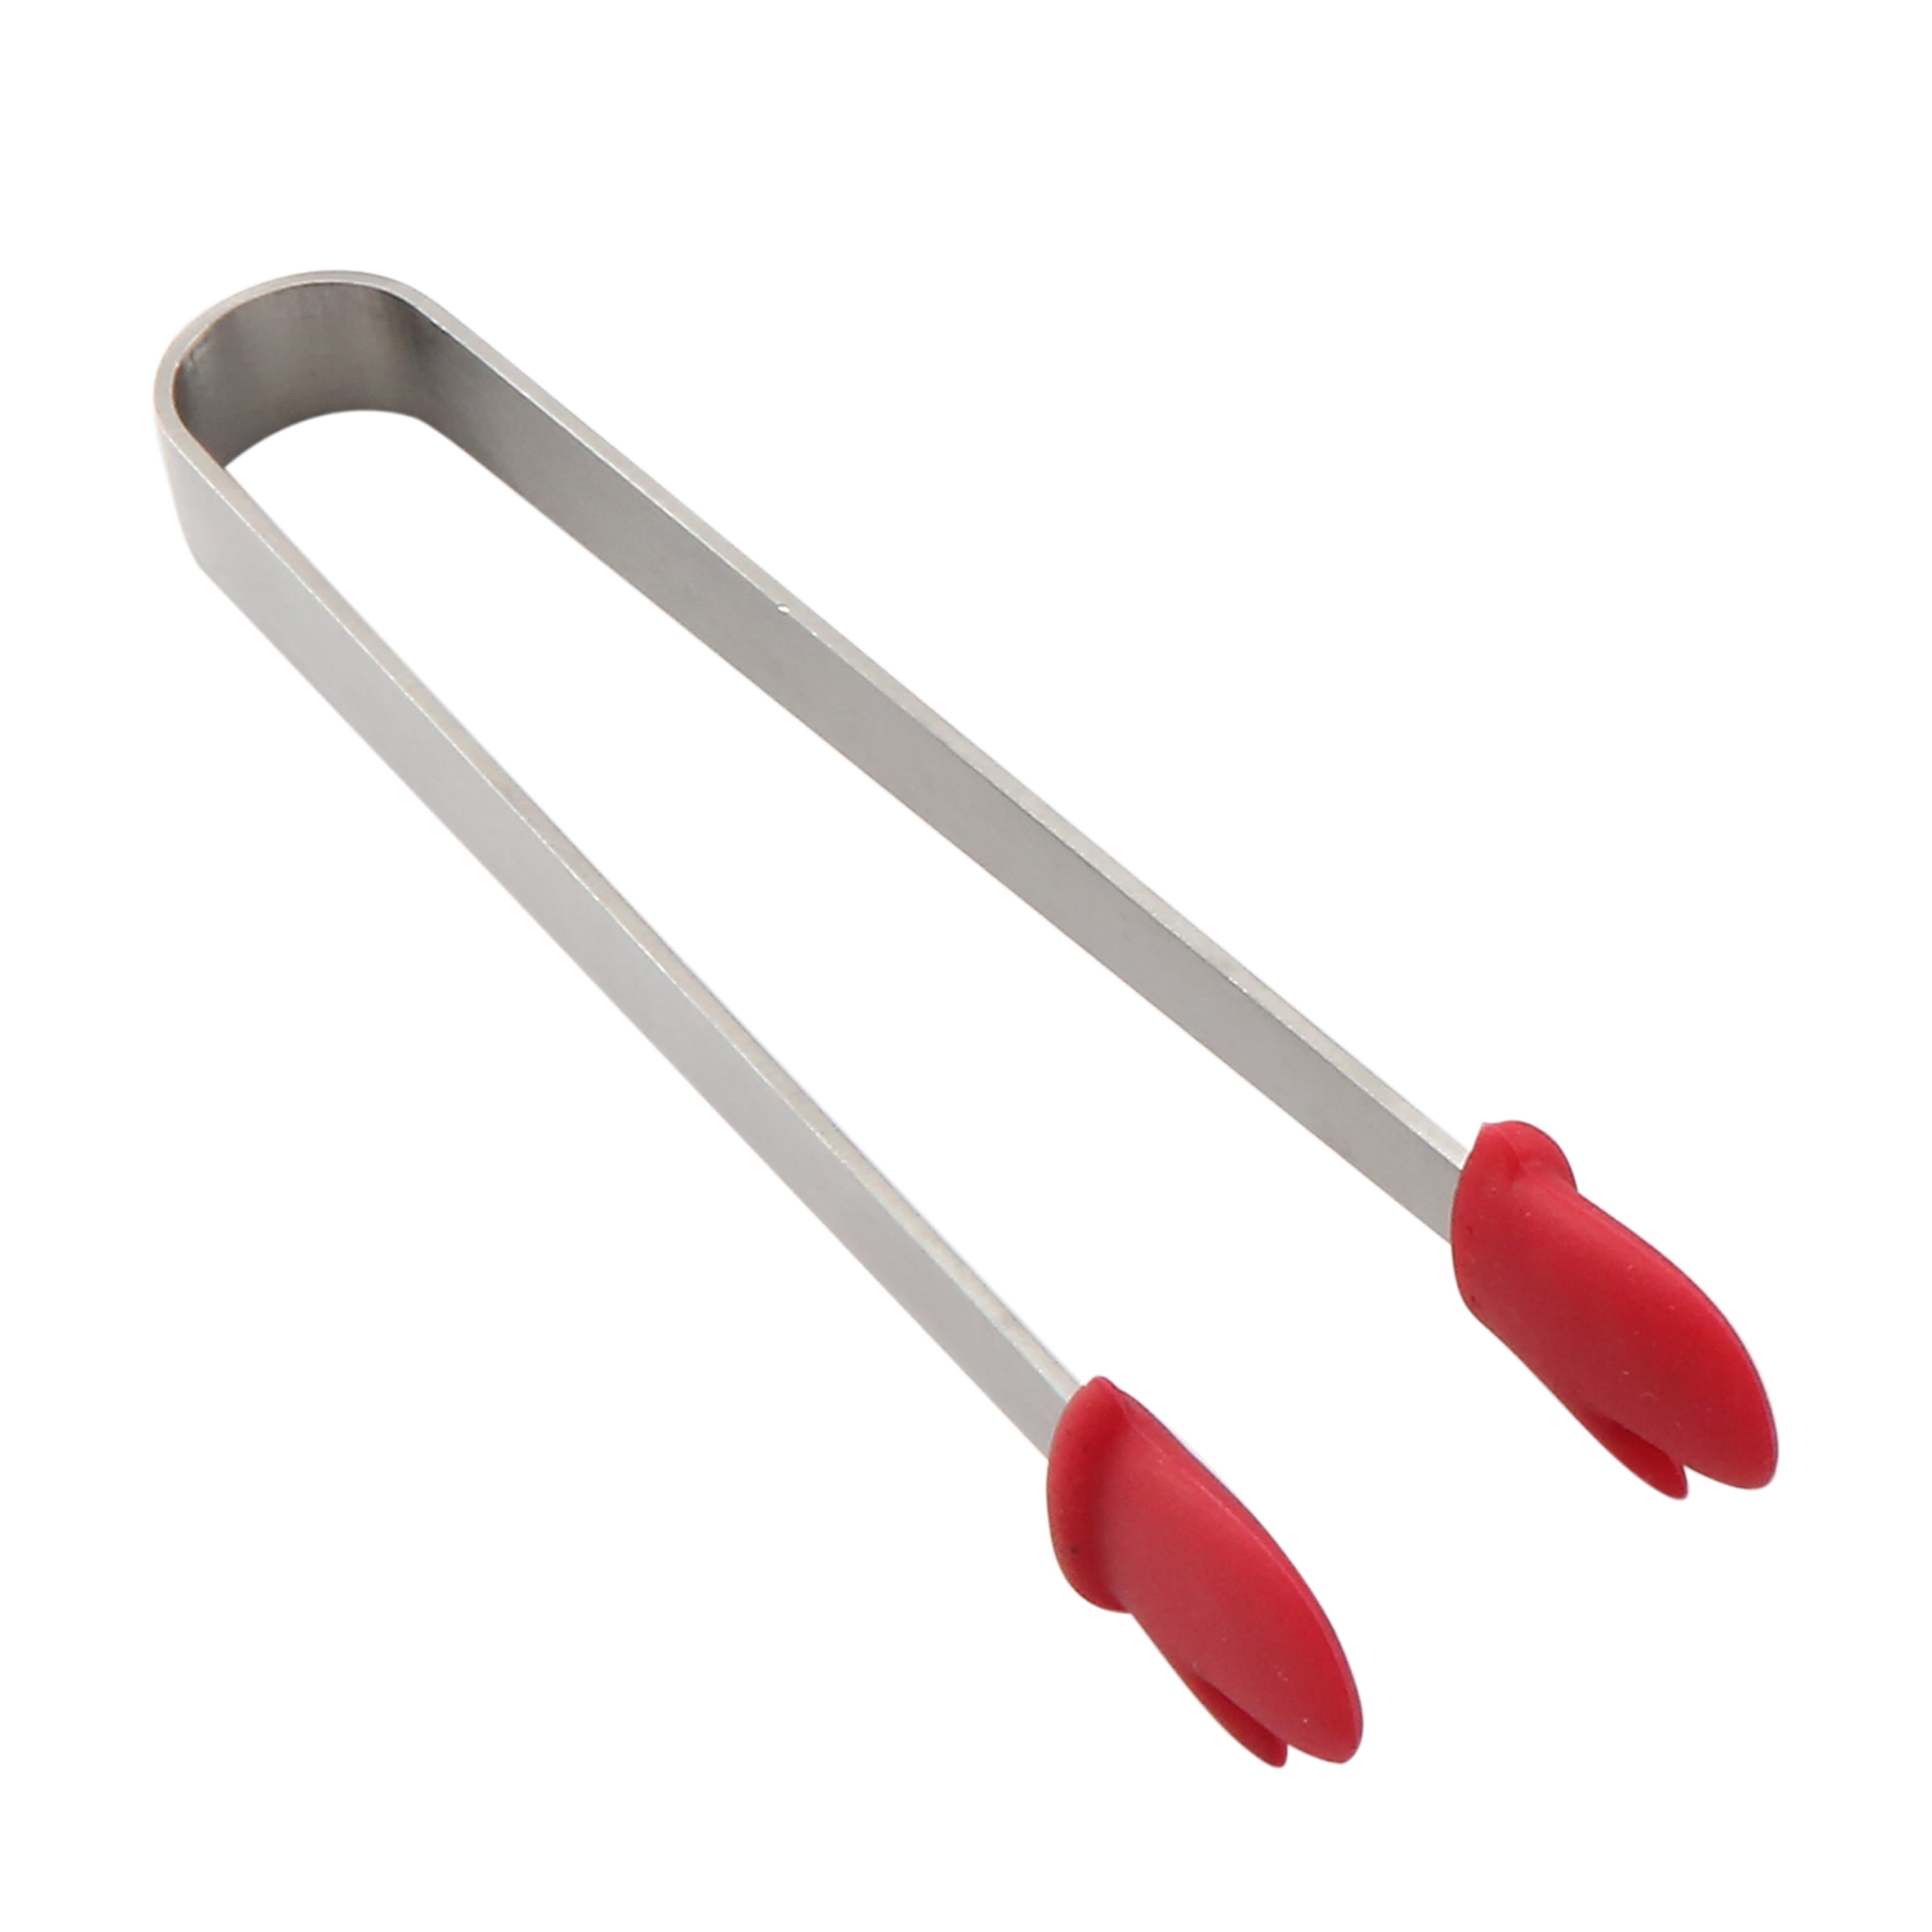 Endurance Mini Tongs, 4-1/4 inch, Stainless Steel